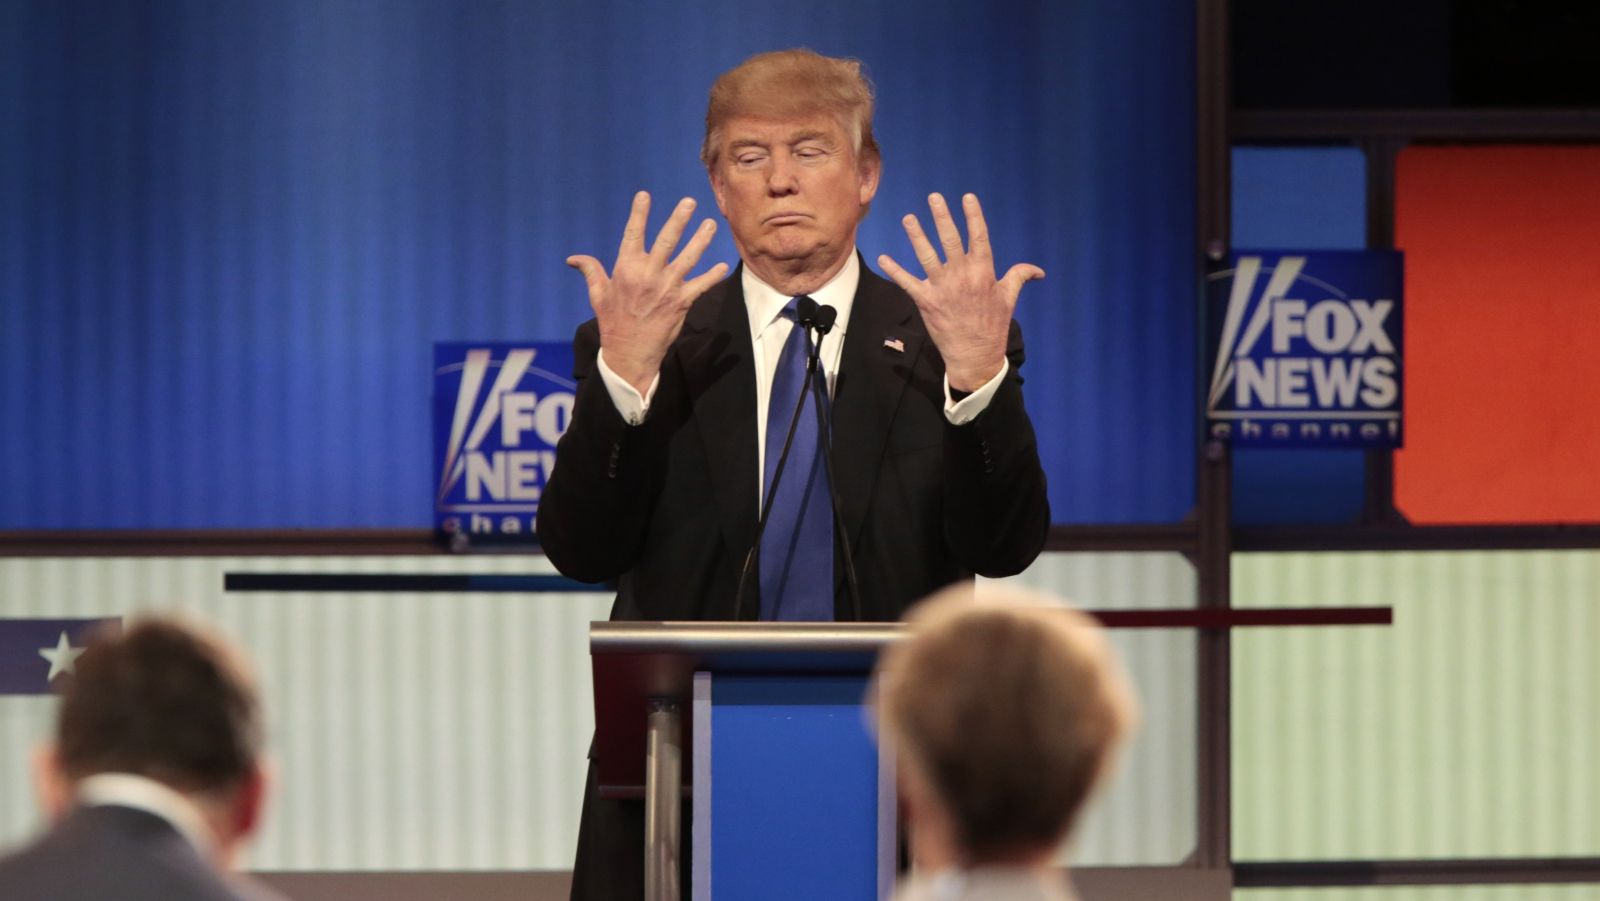 Trump shows the crowd his AAA battery sized fingers